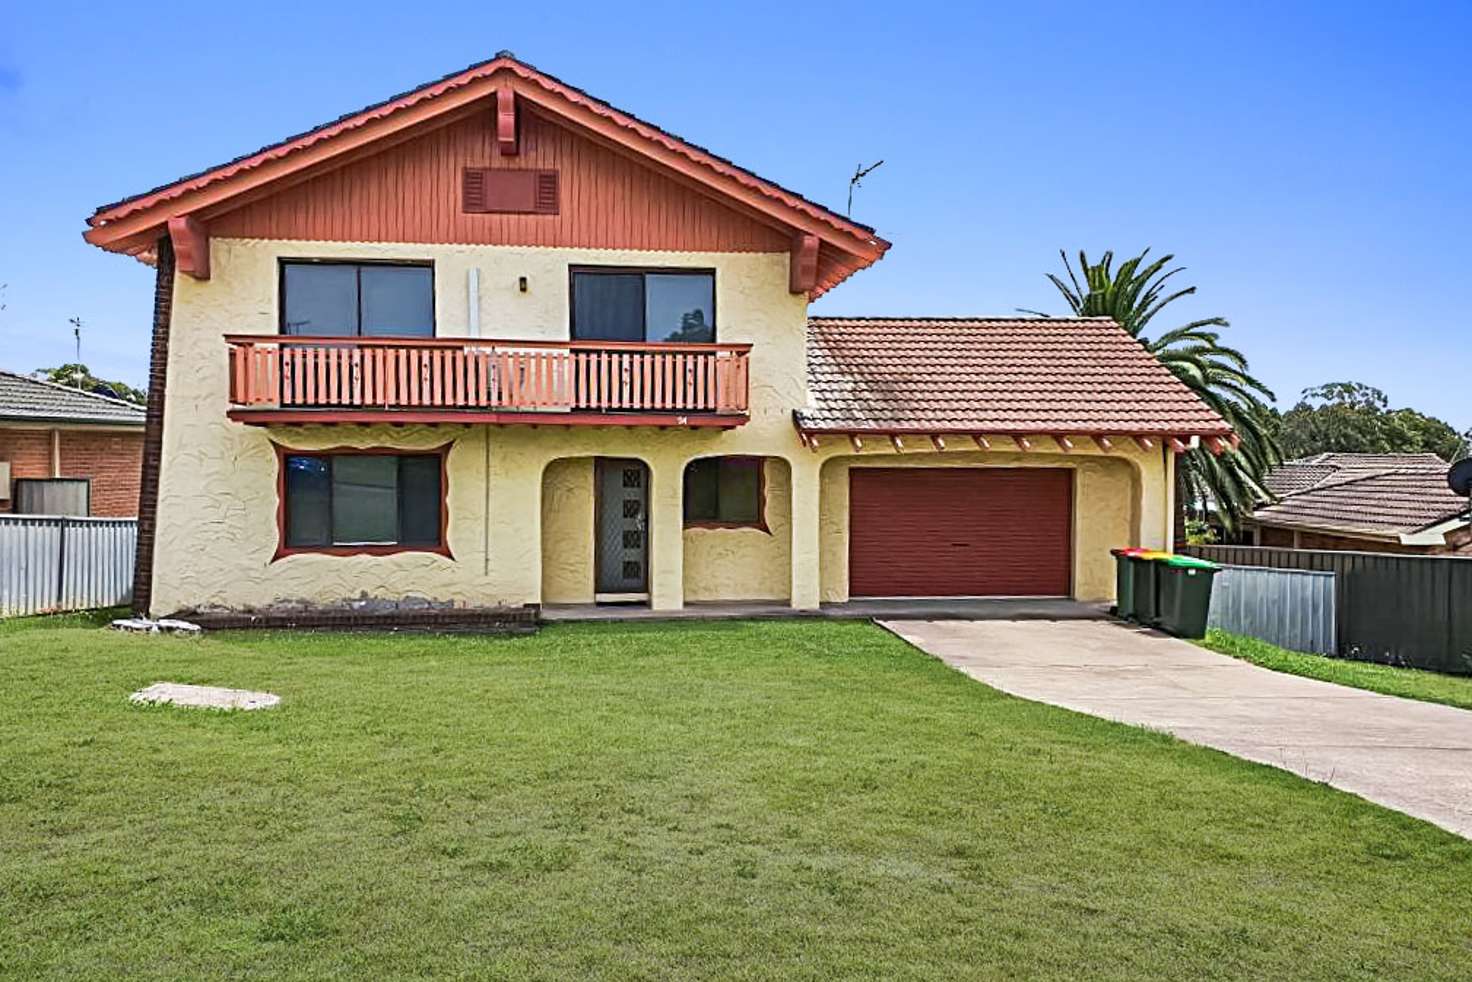 Main view of Homely house listing, 24 Evatt Street, Pelaw Main NSW 2327